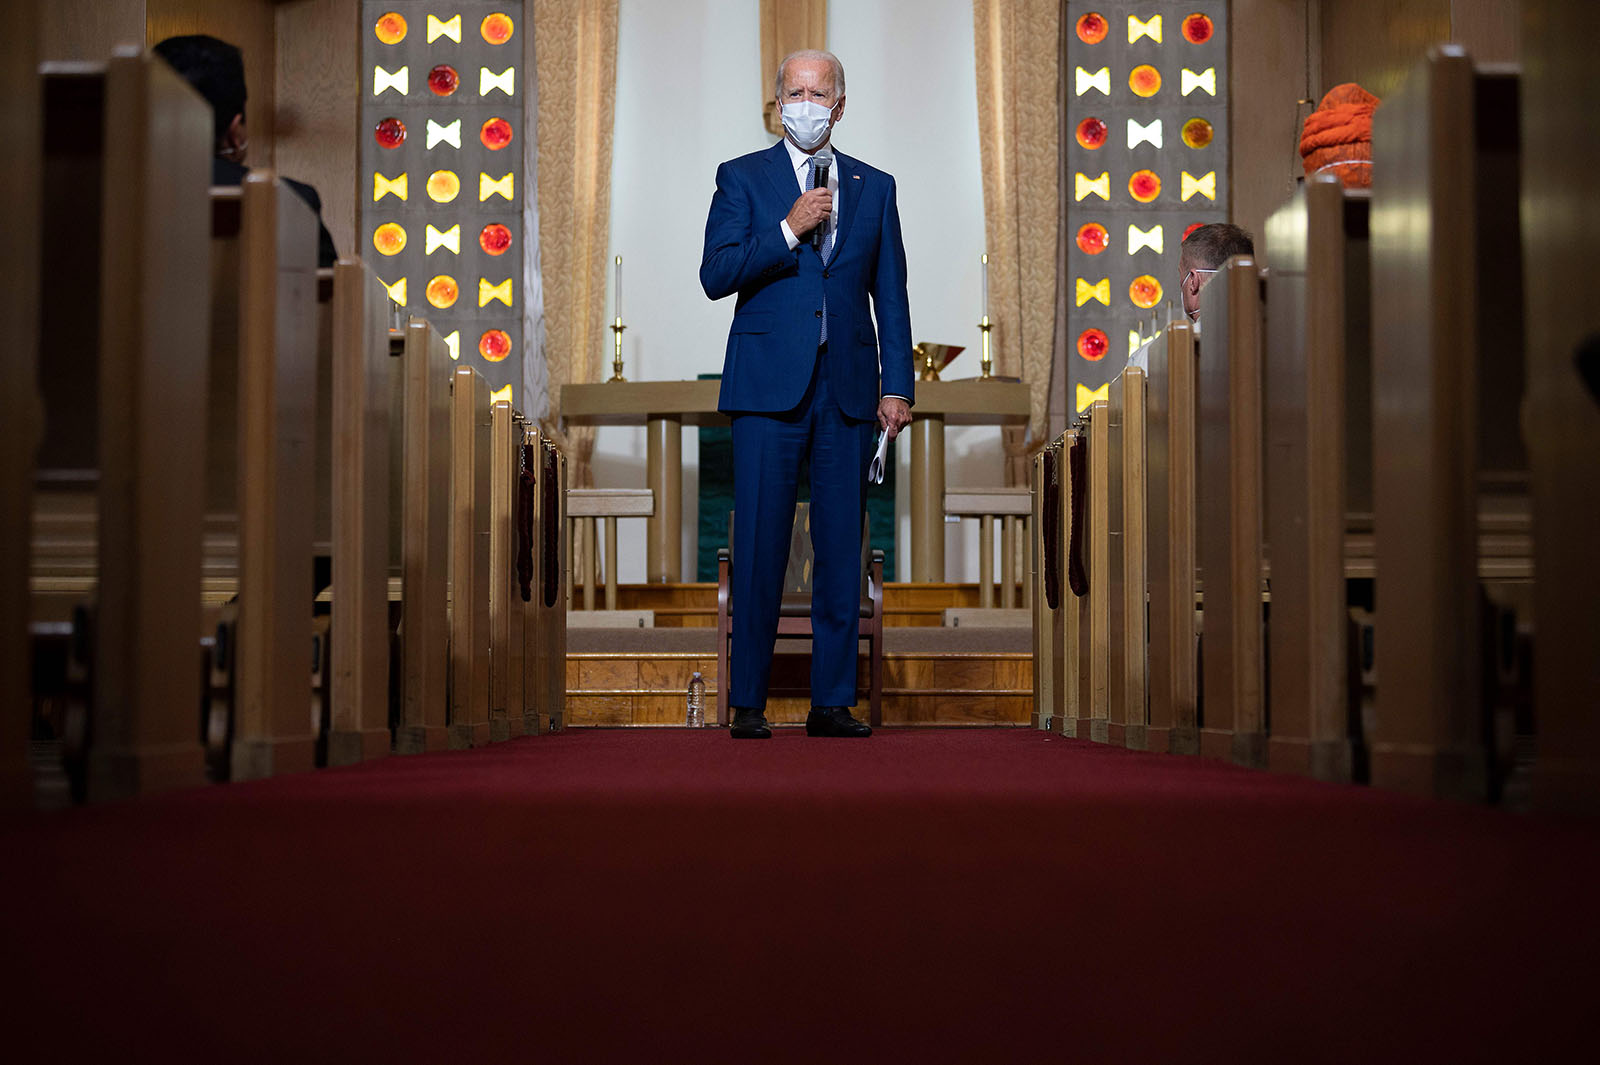 Democratic presidential candidate and former US Vice President Joe Biden speaks at Grace Lutheran Church in Kenosha, Wisconsin, on September 3, in the aftermath of the police shooting of Jacob Blake. 